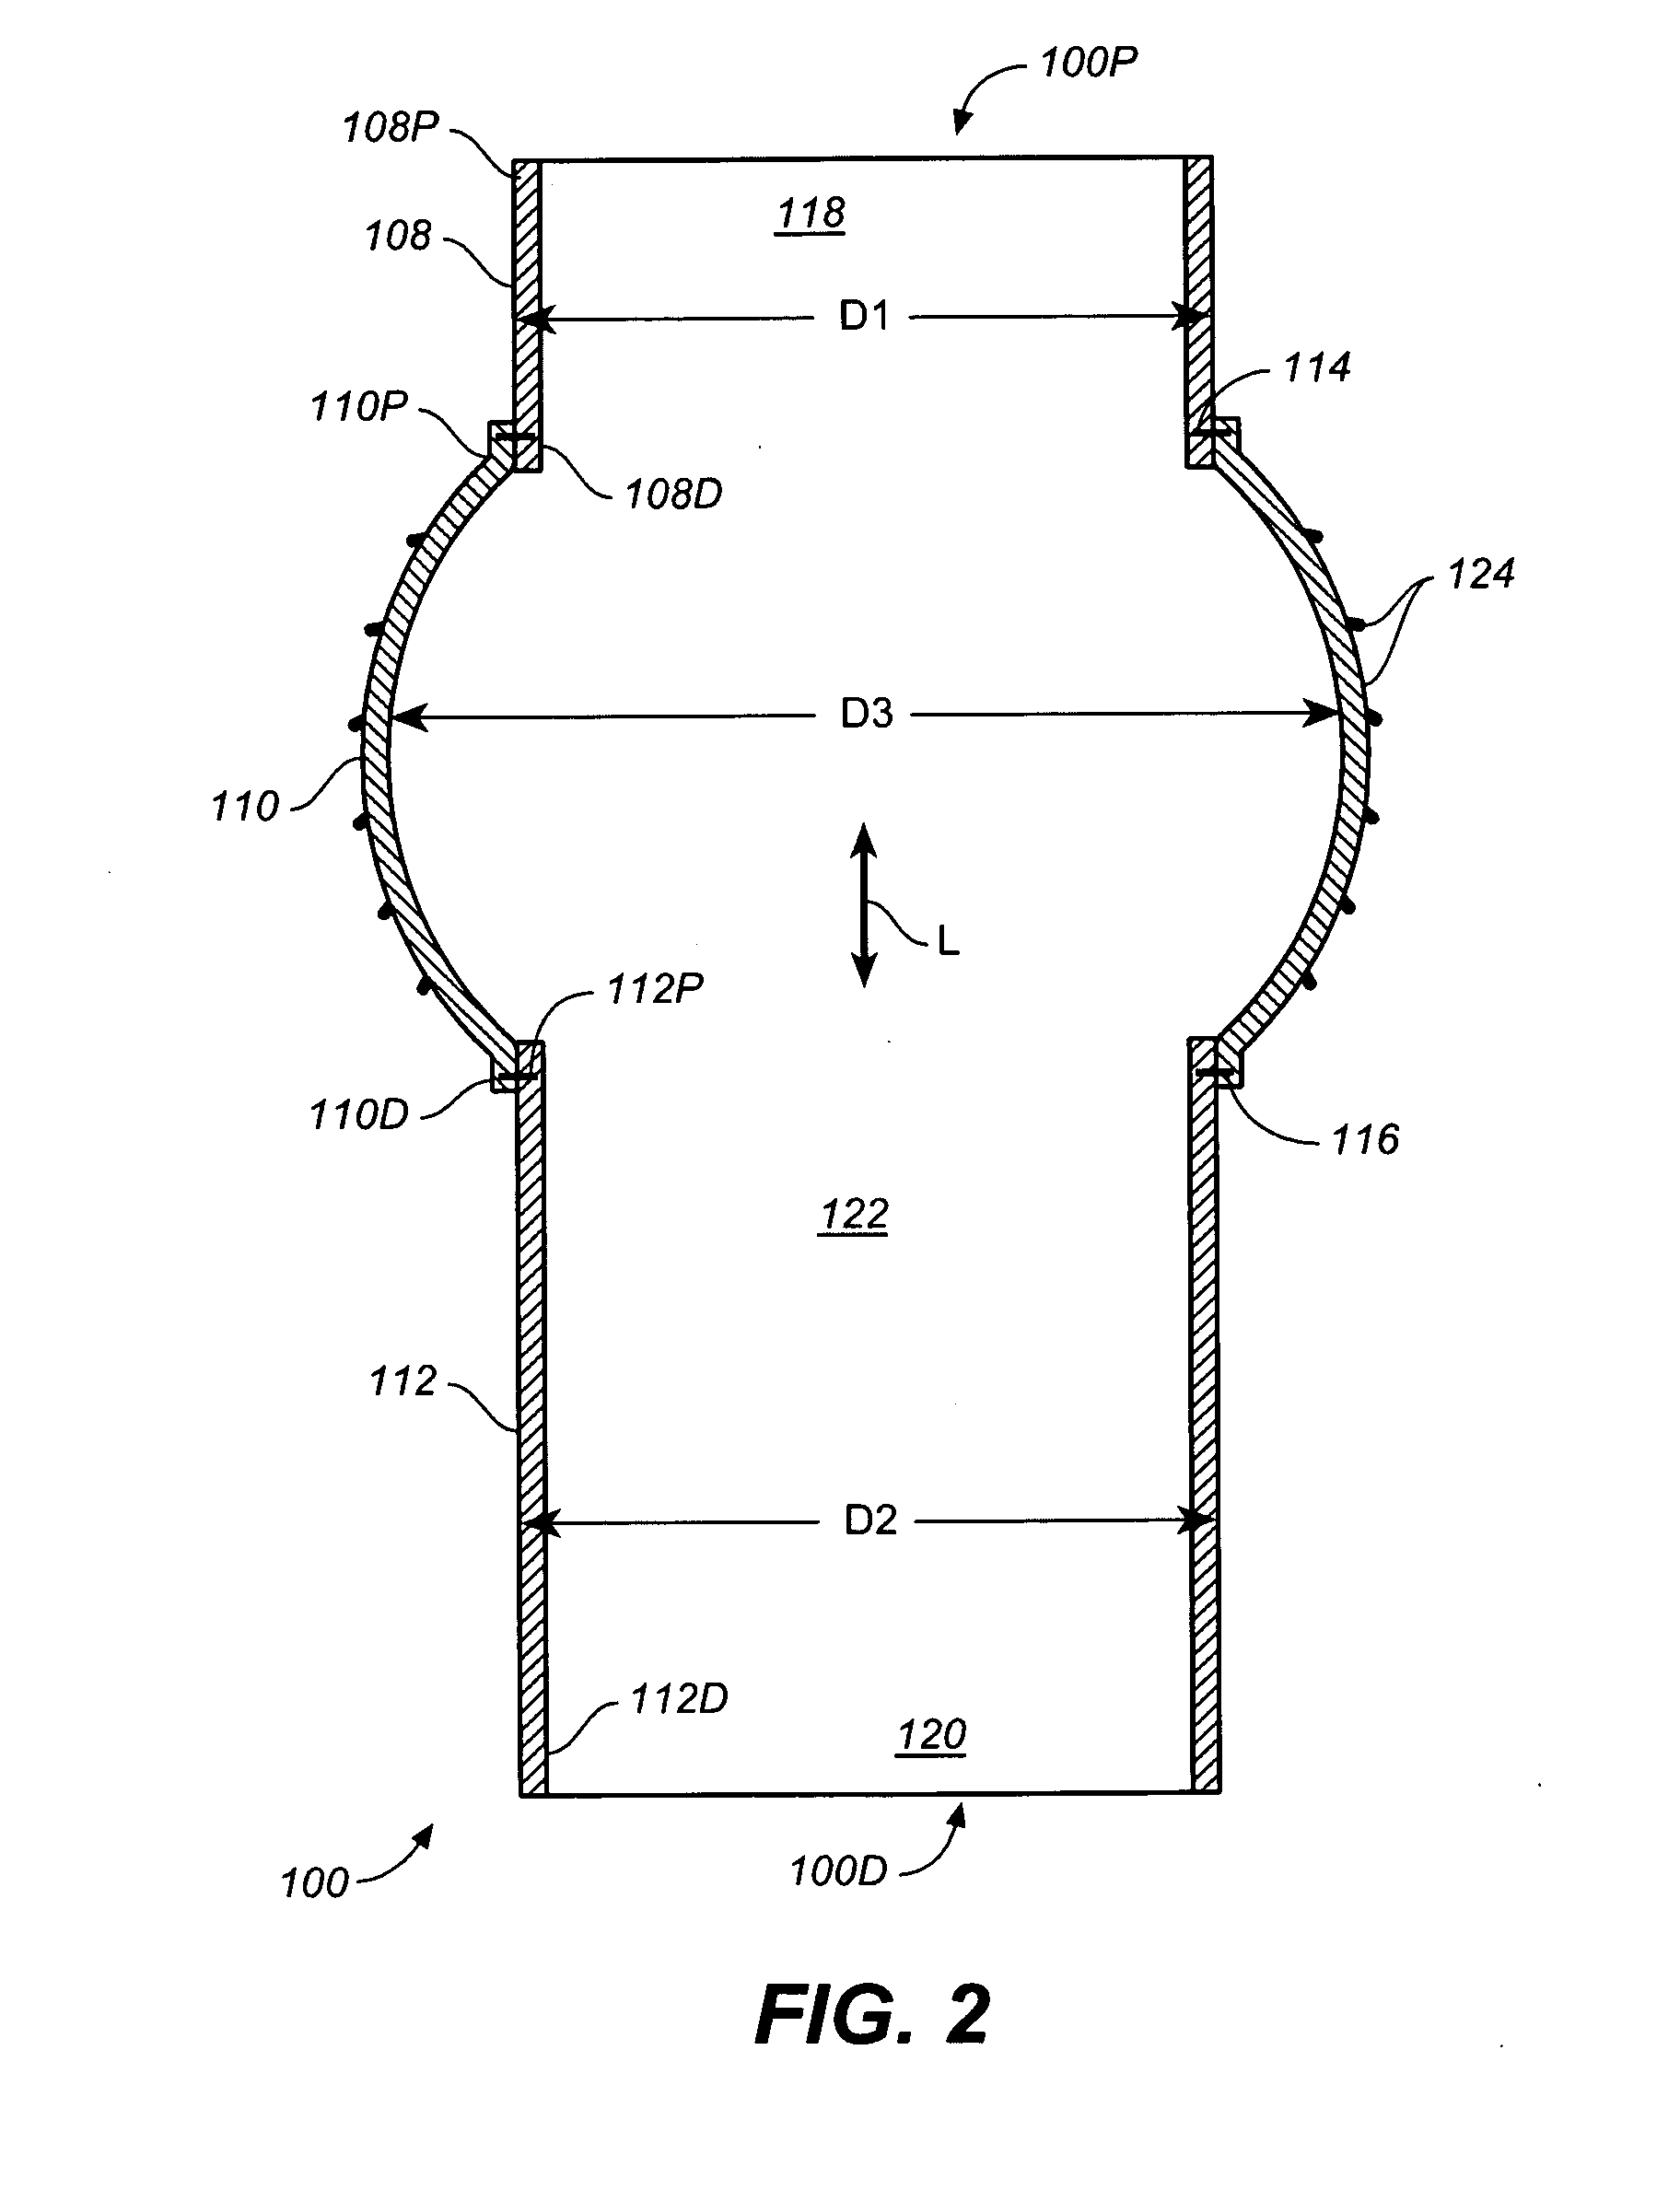 Bloused Stent-Graft and Fenestration Method